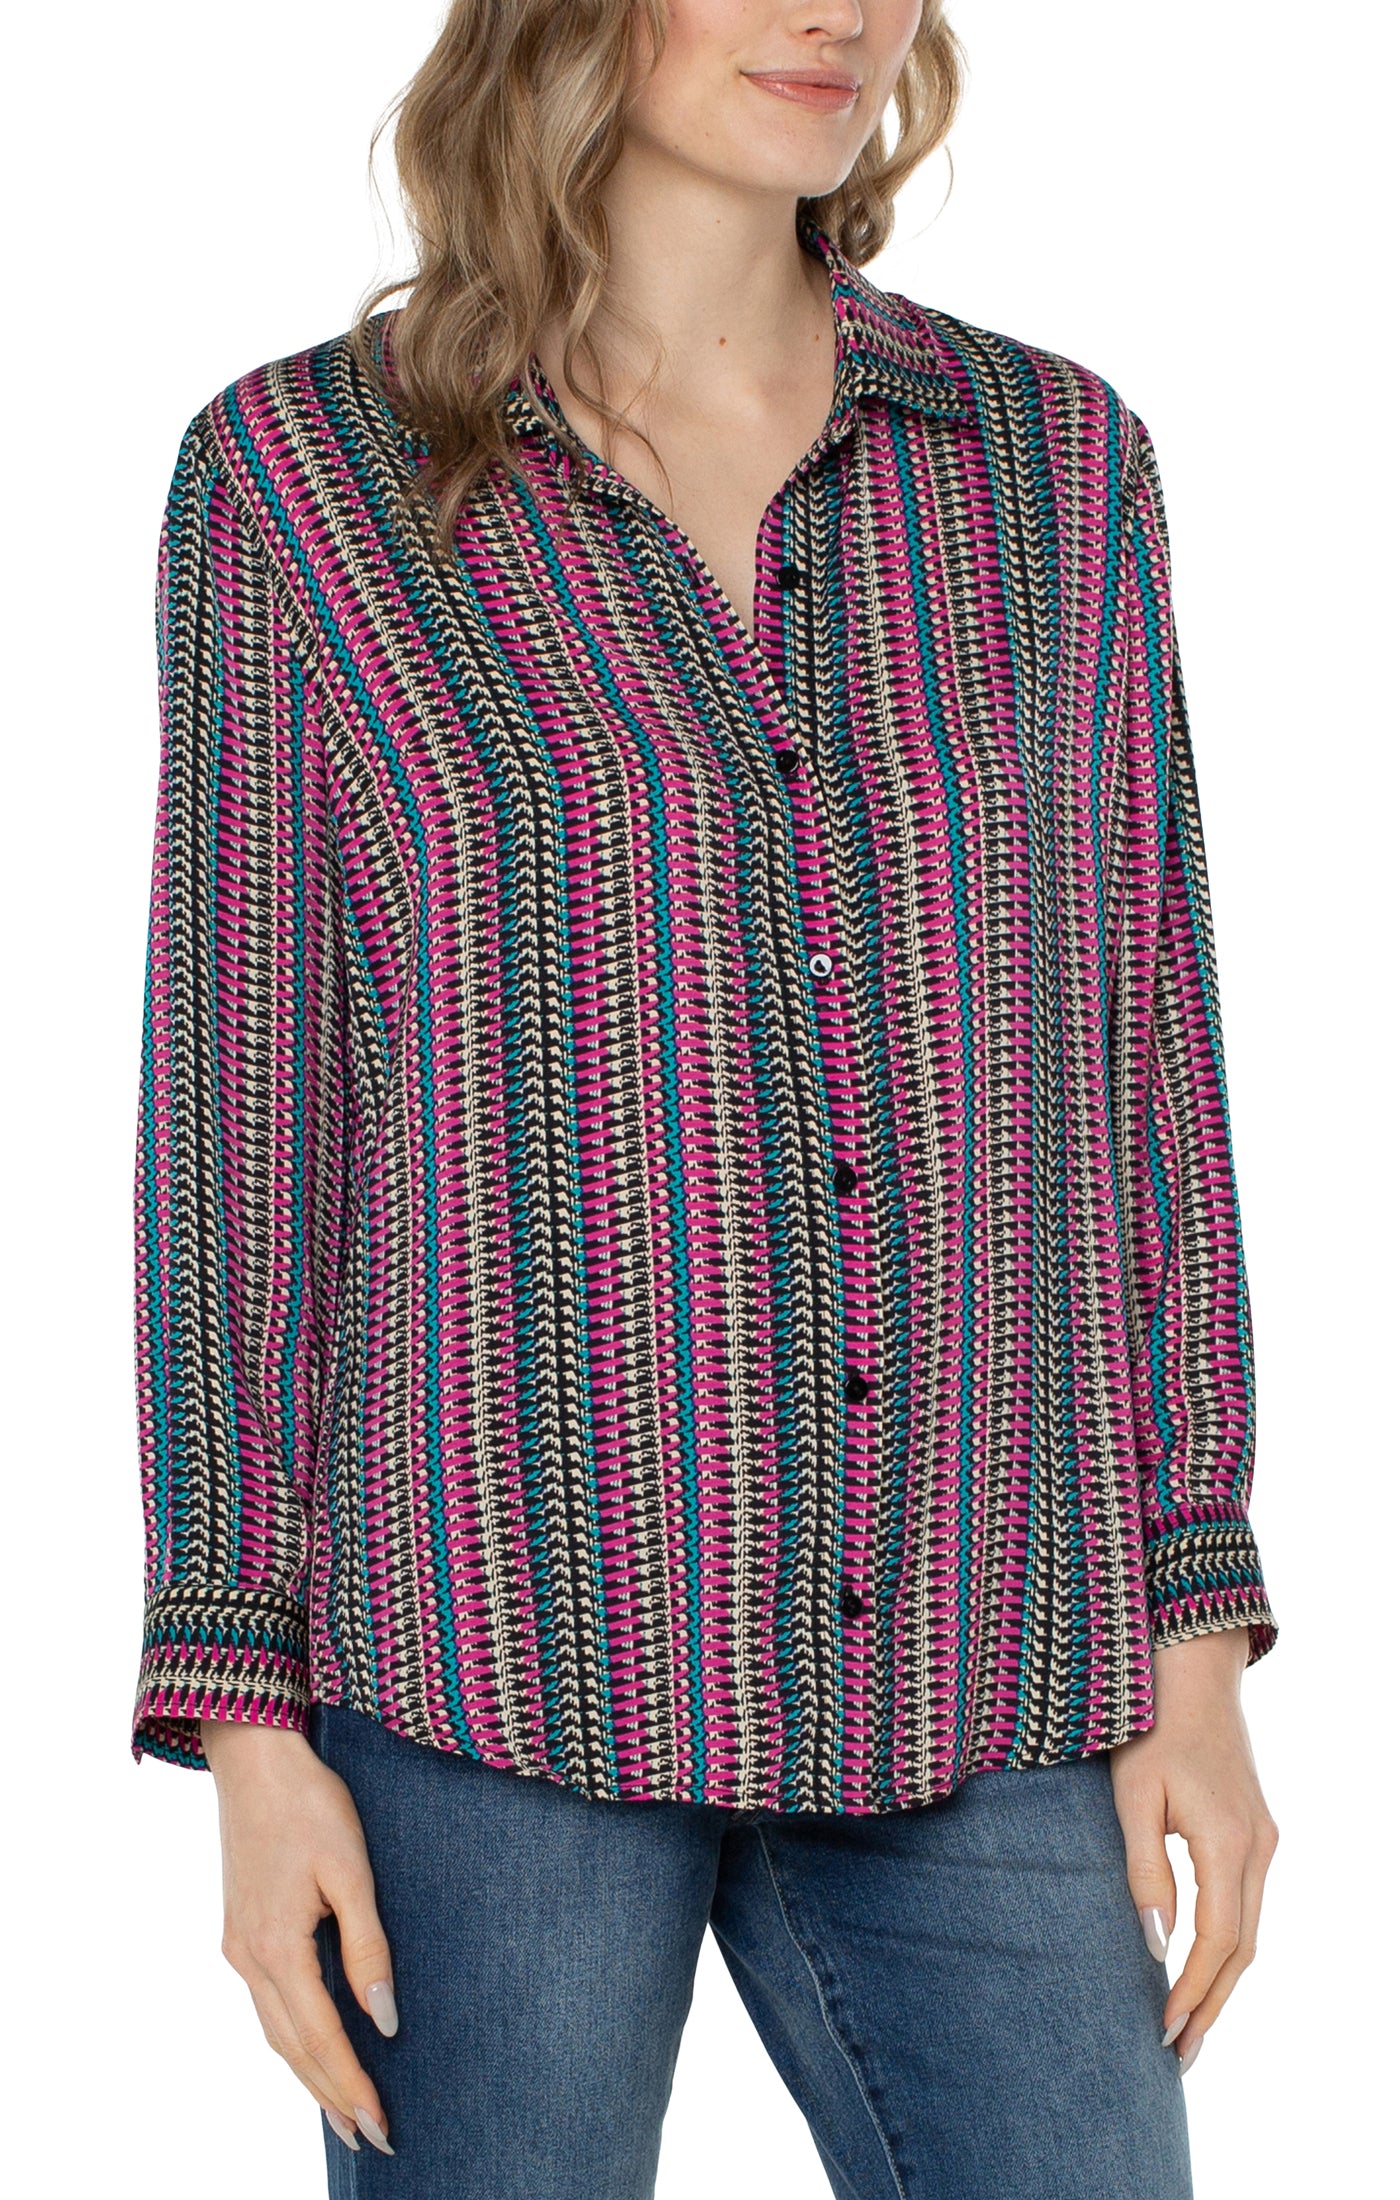 BUTTON UP BLOUSE WOVEN